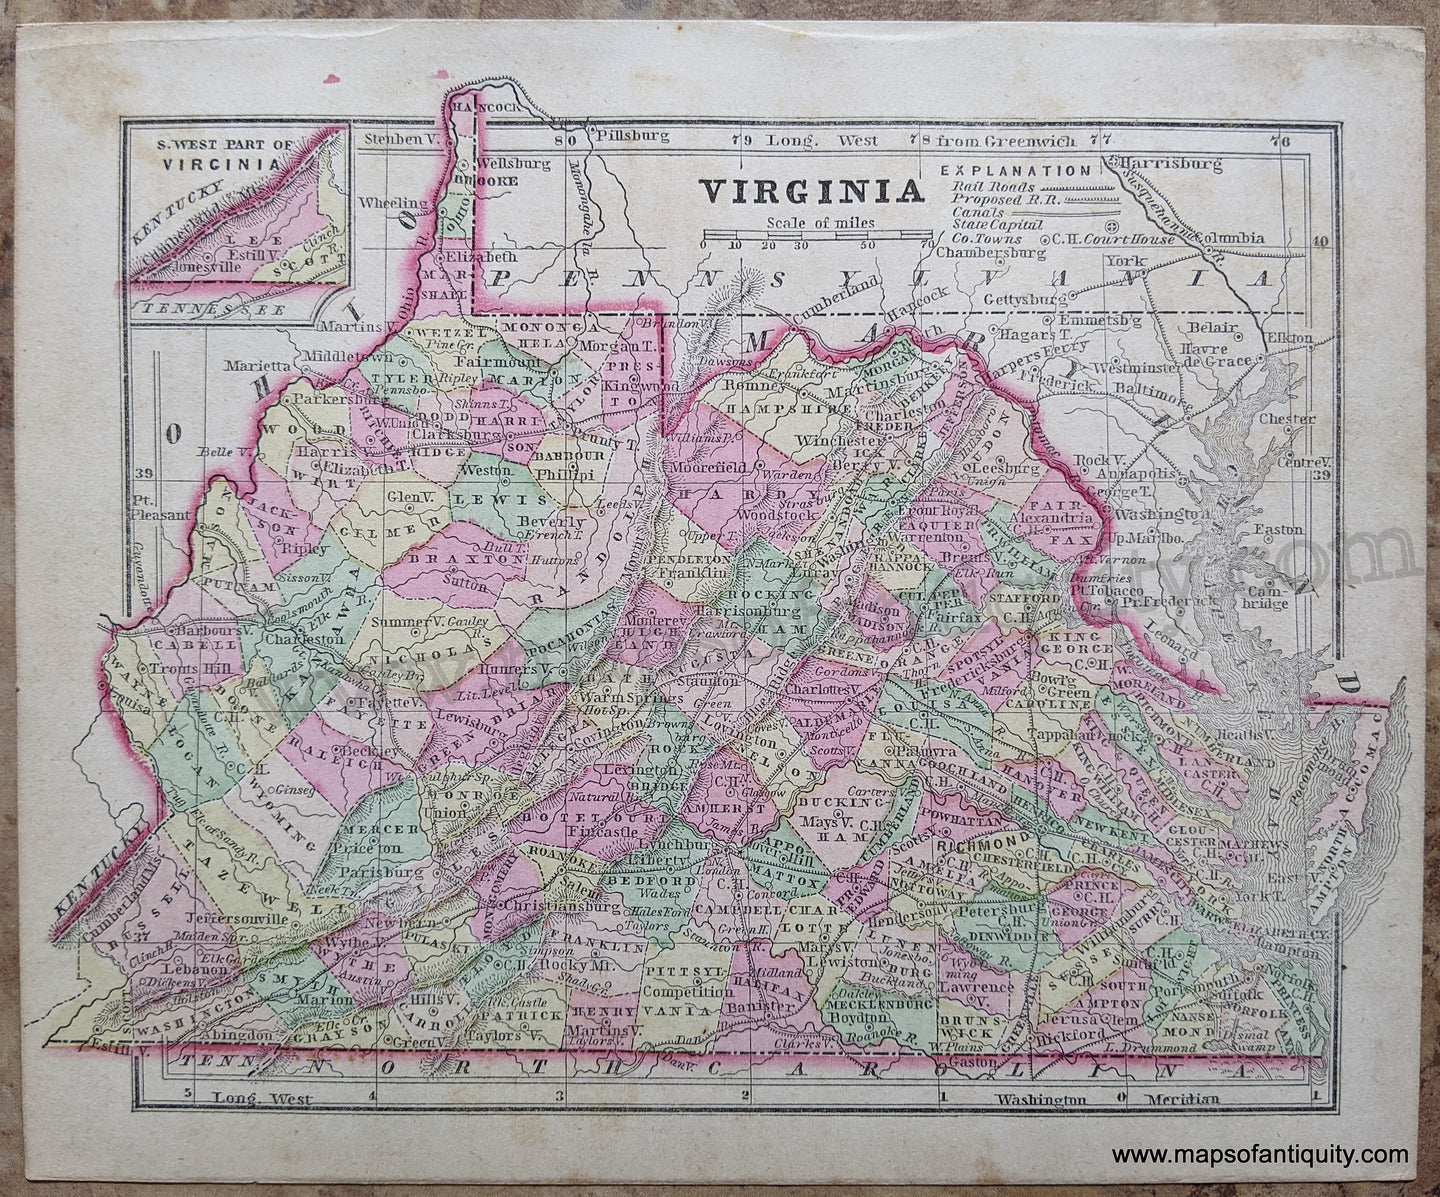 Antique-Hand-Colored-Map-Virginia-United-States-Mid-Atlantic-1857-Morse-and-Gaston-Maps-Of-Antiquity-1800s-19th-century